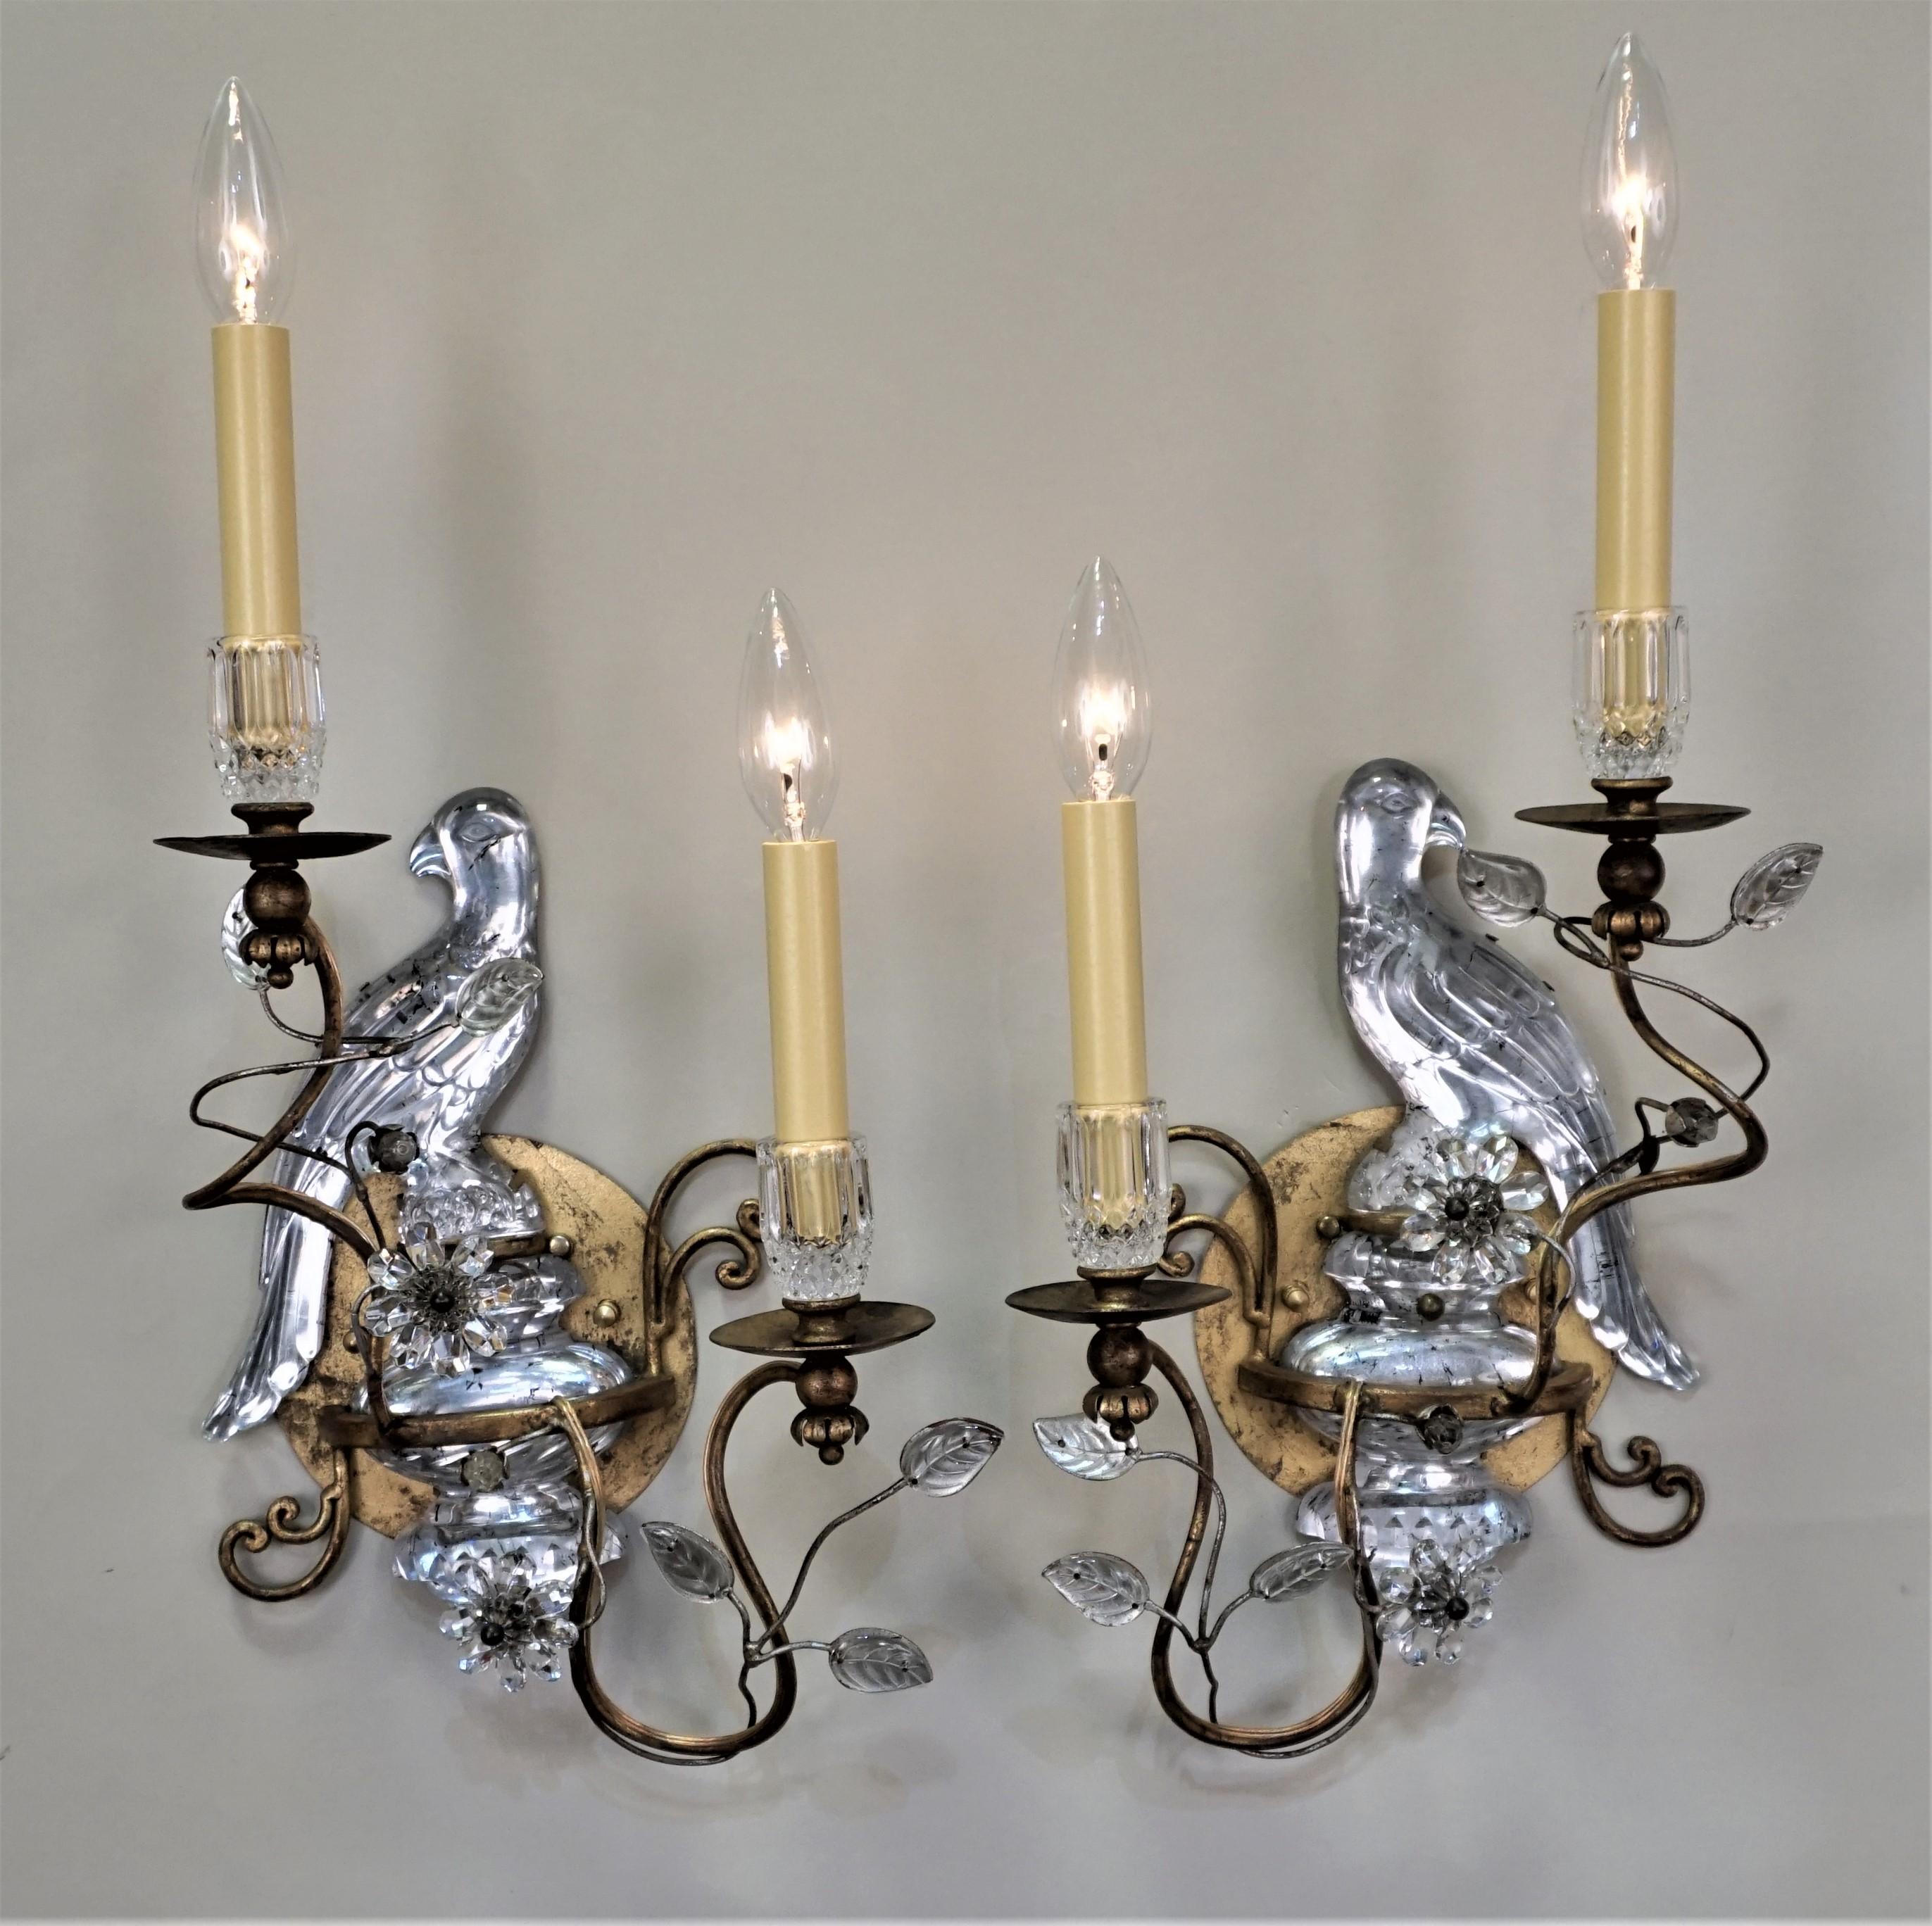 A stunning pair of gilt iron, touch of silver and crystal sconces by of Maison Baguès. These double light wall sconces feature the flower and leaf design with big bird as backplate.